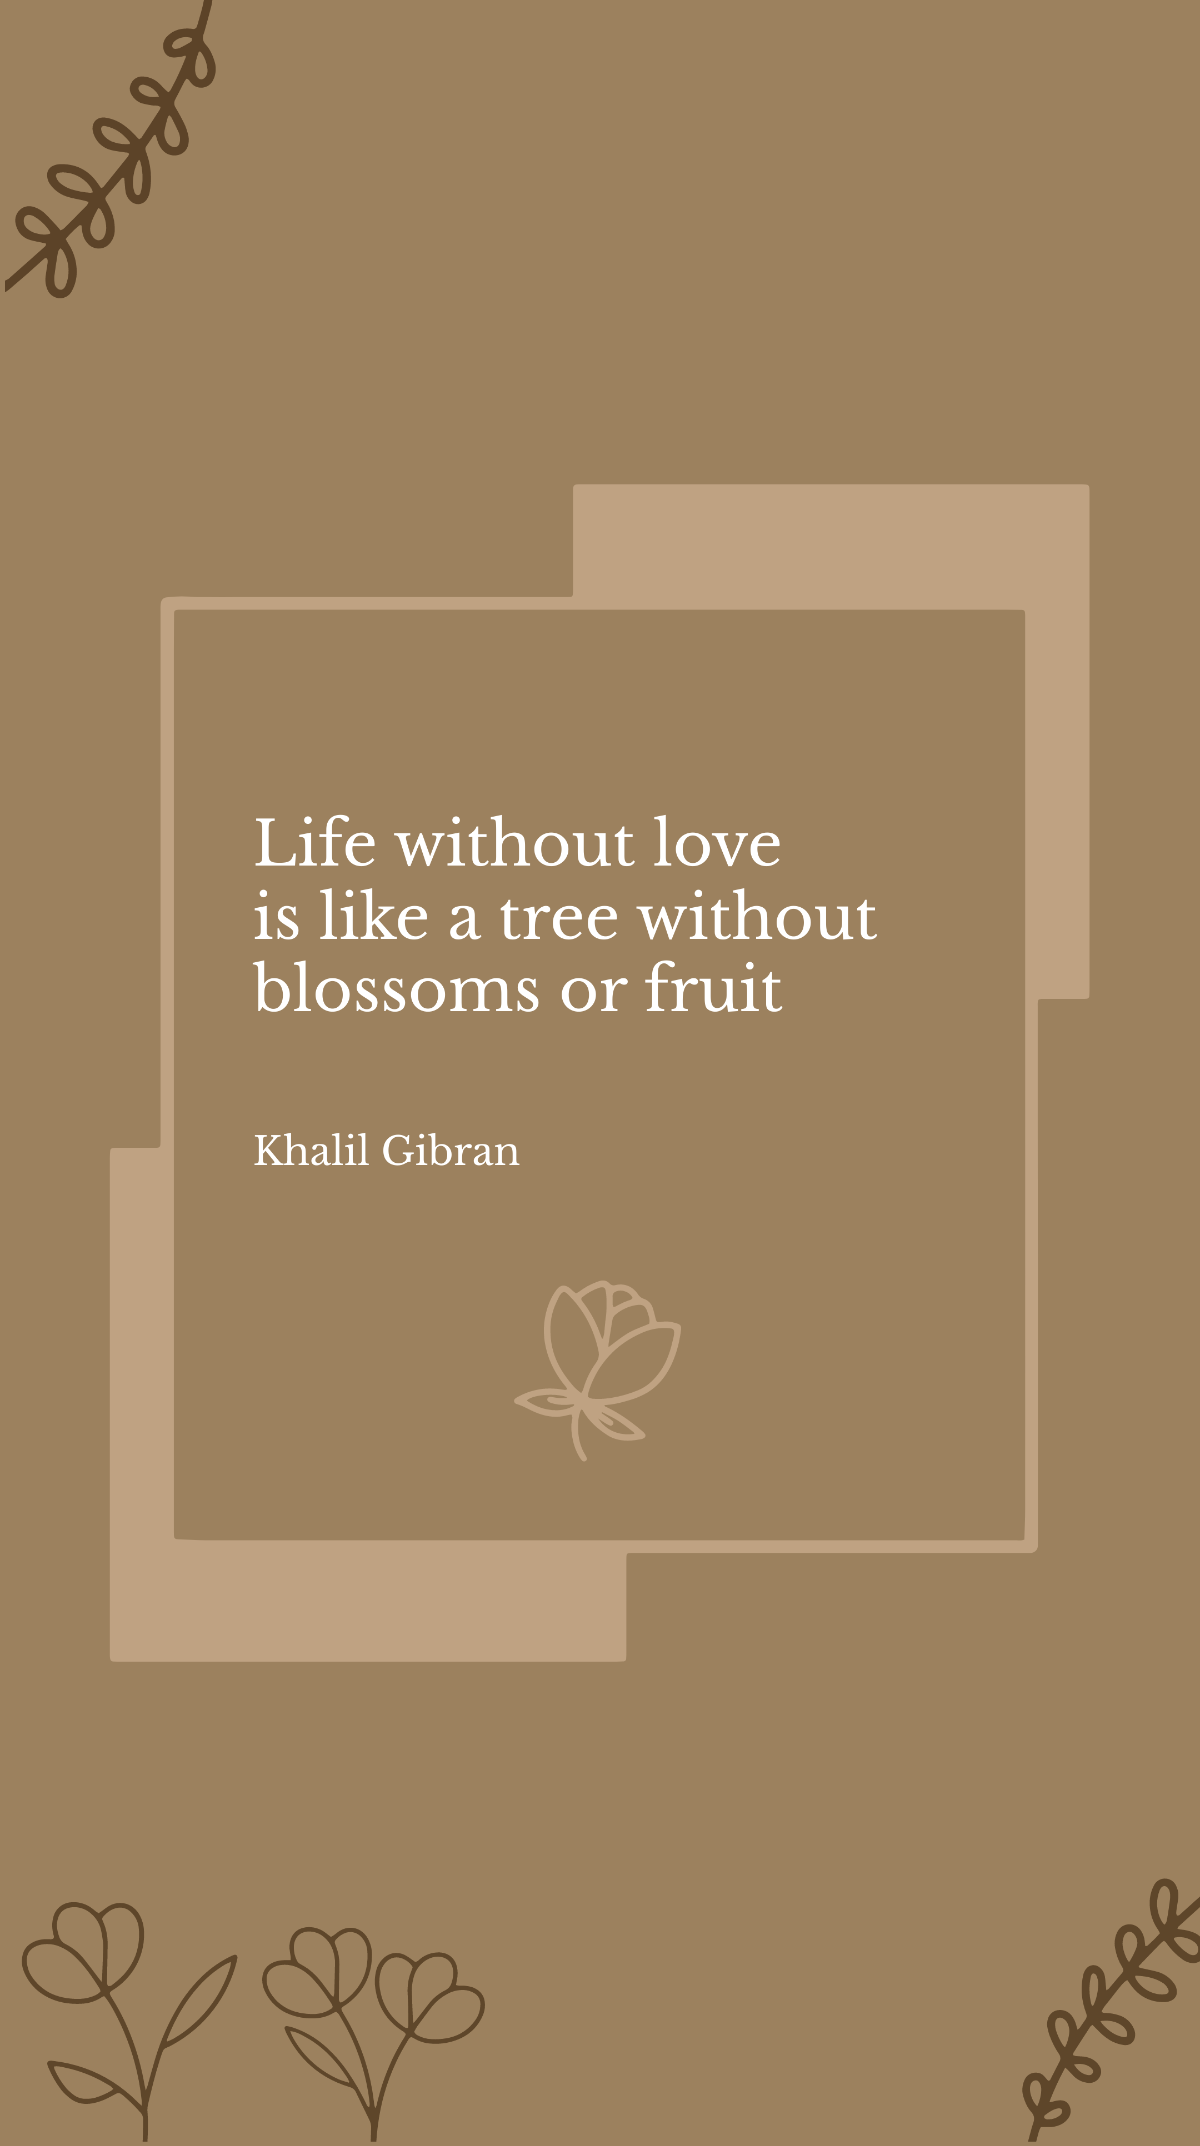 Khalil Gibran - Life without love is like a tree without blossoms or fruit